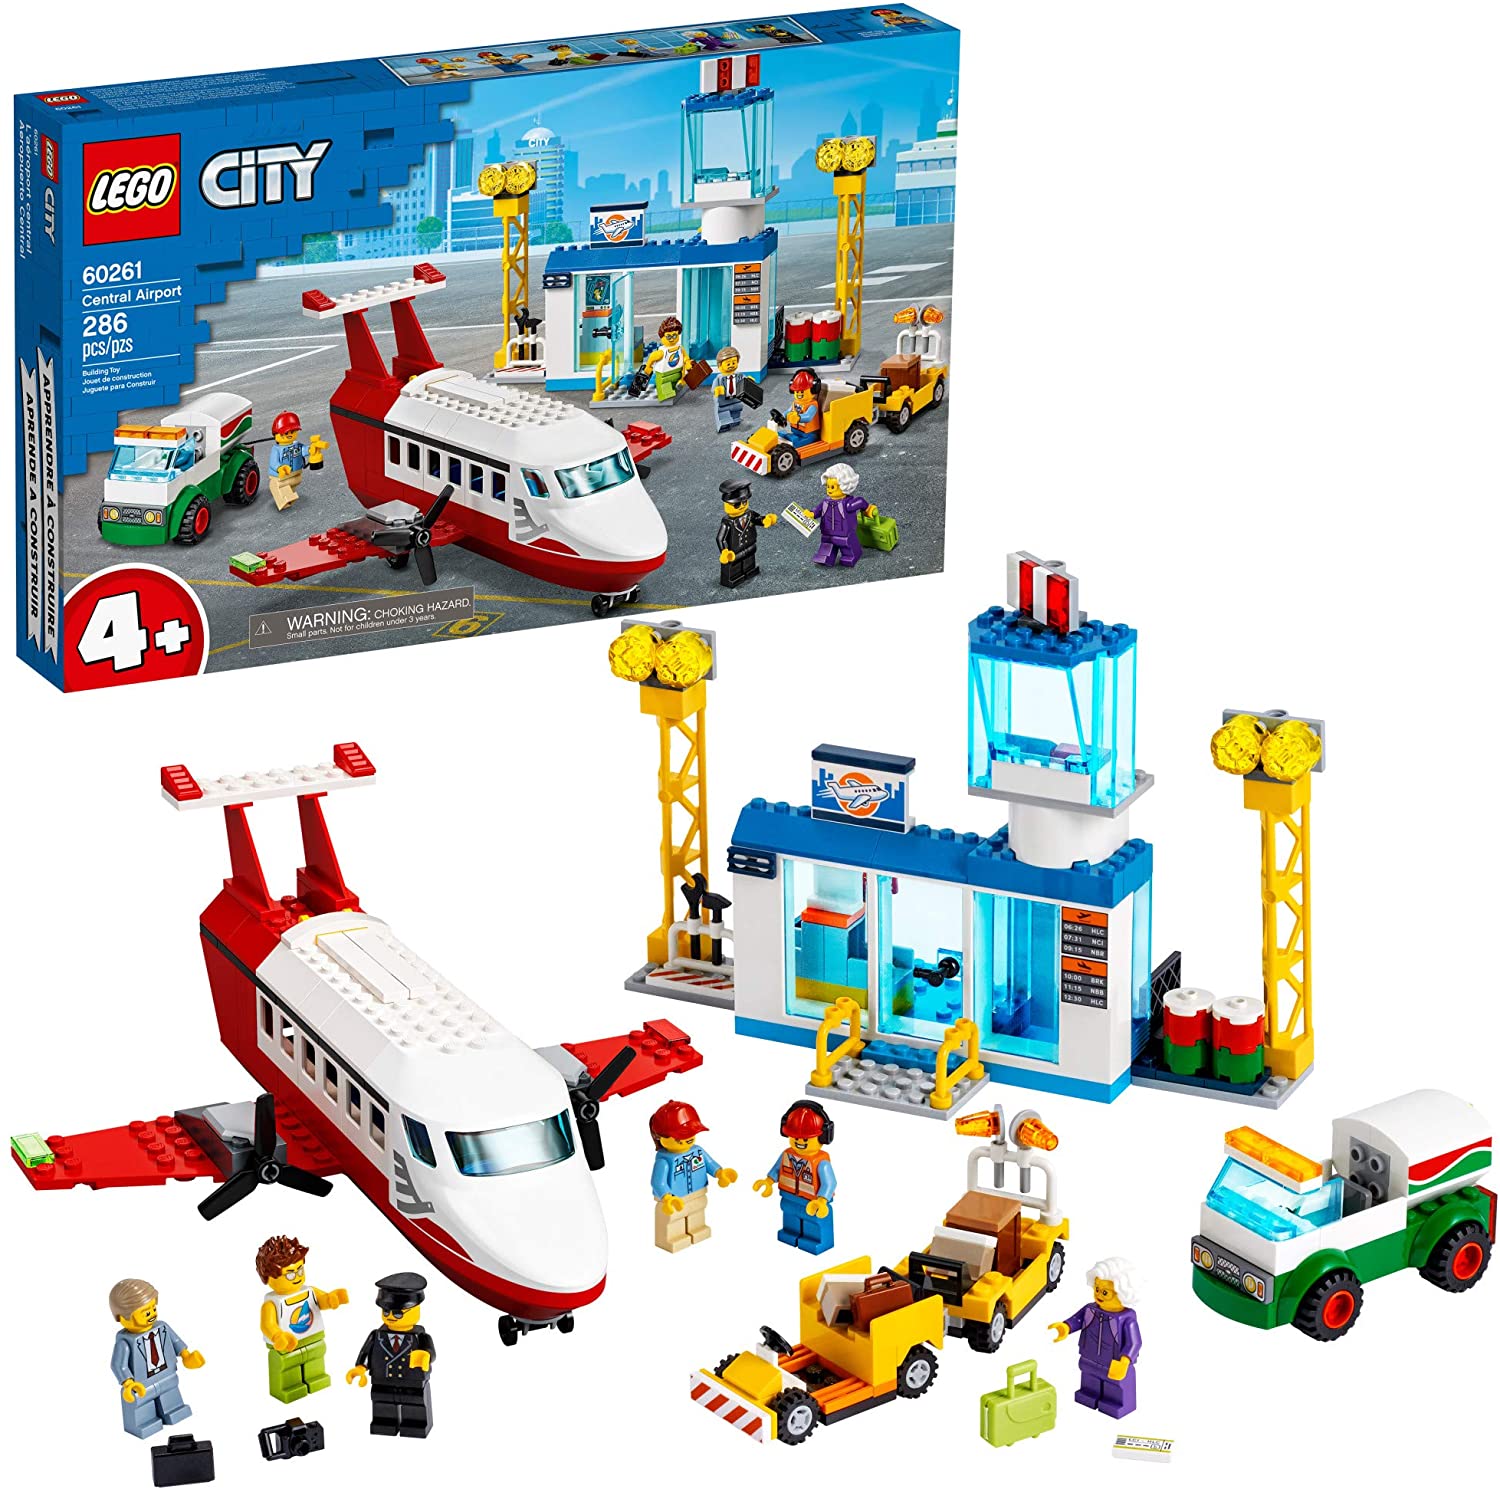 Lego City Central Airport Building Toy, 286 Pieces - ANB Baby -block set